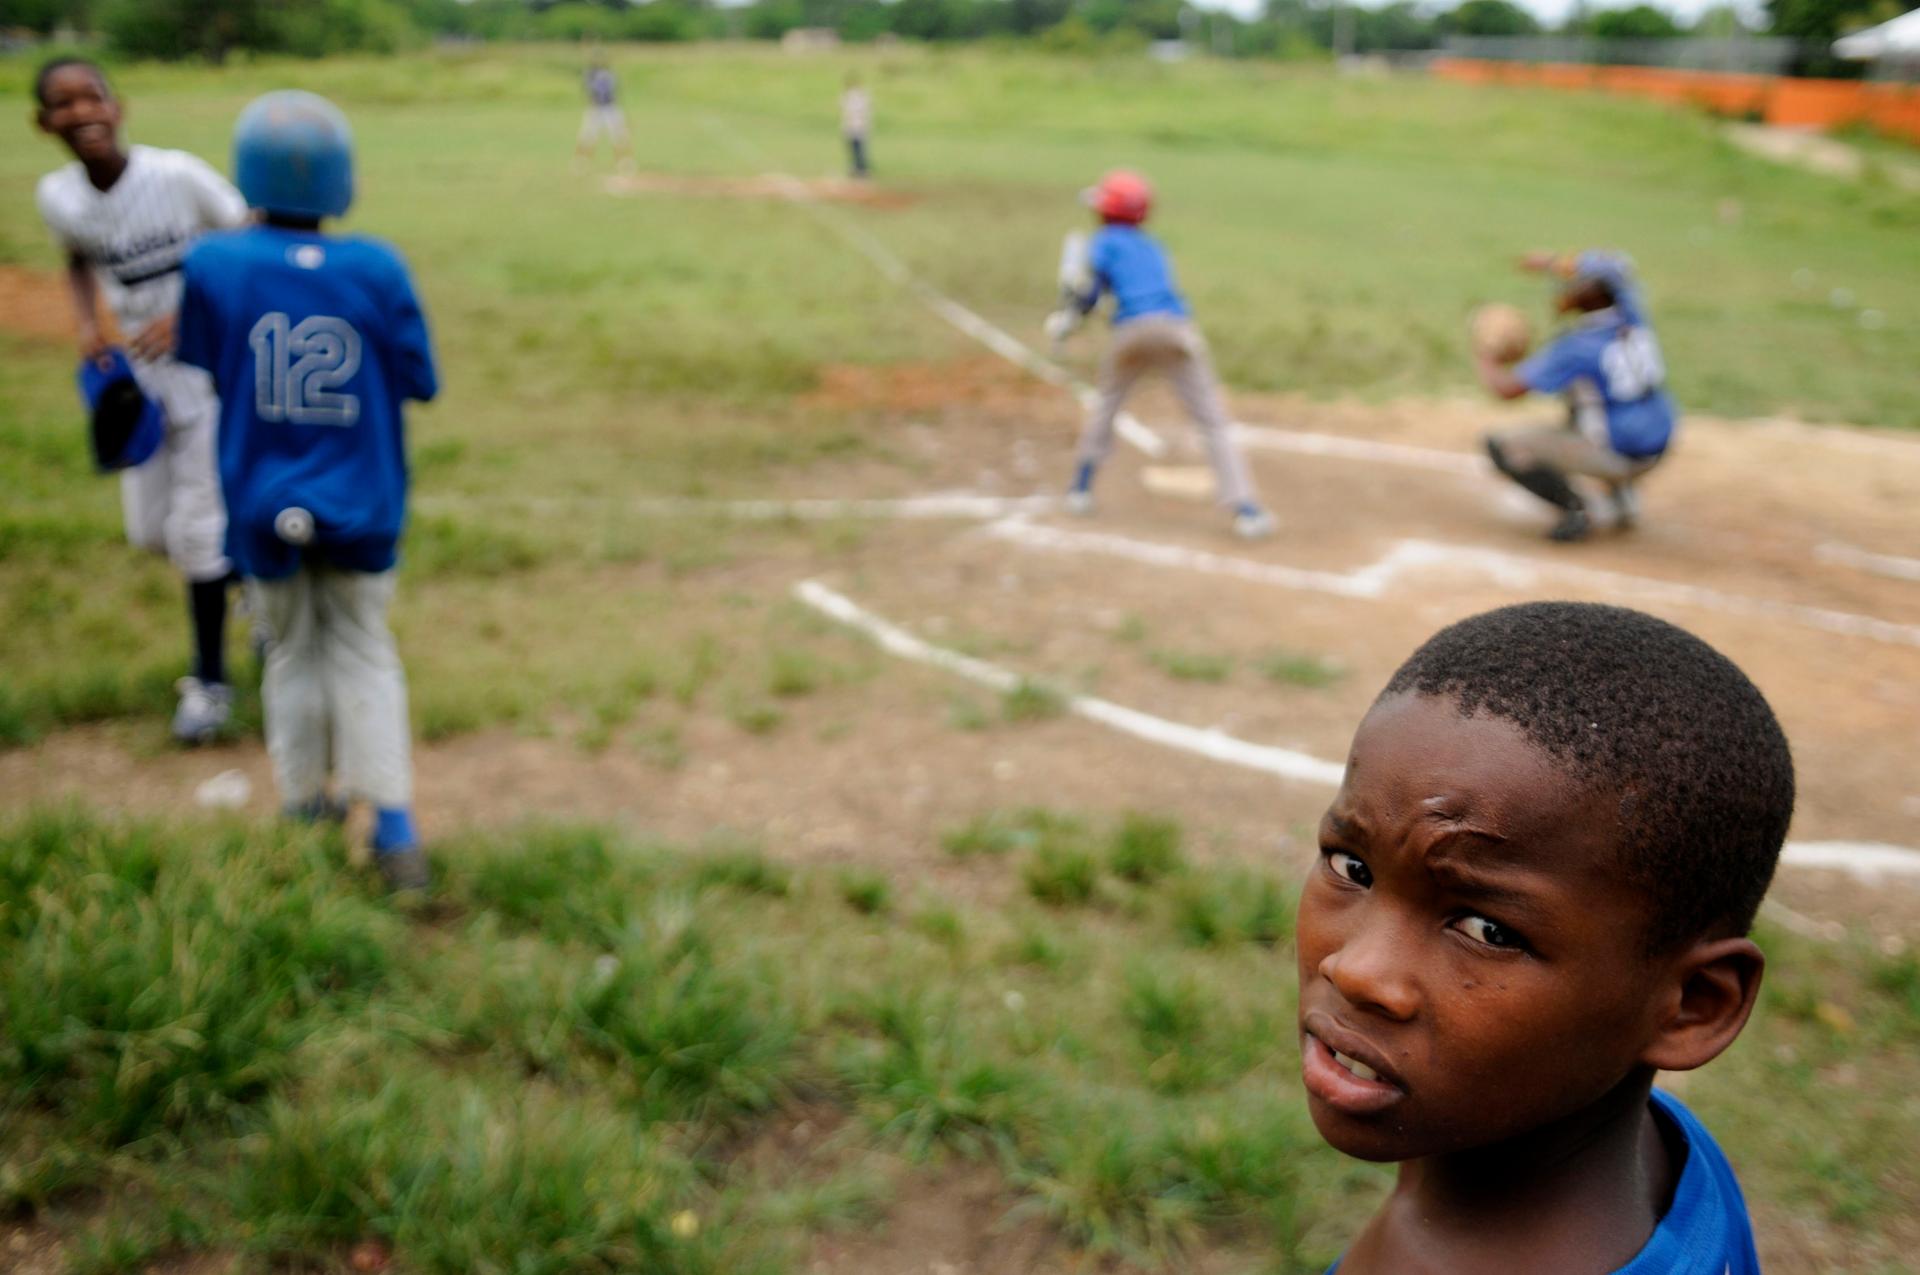 A young boy looks into a camera while others play baseball behind him